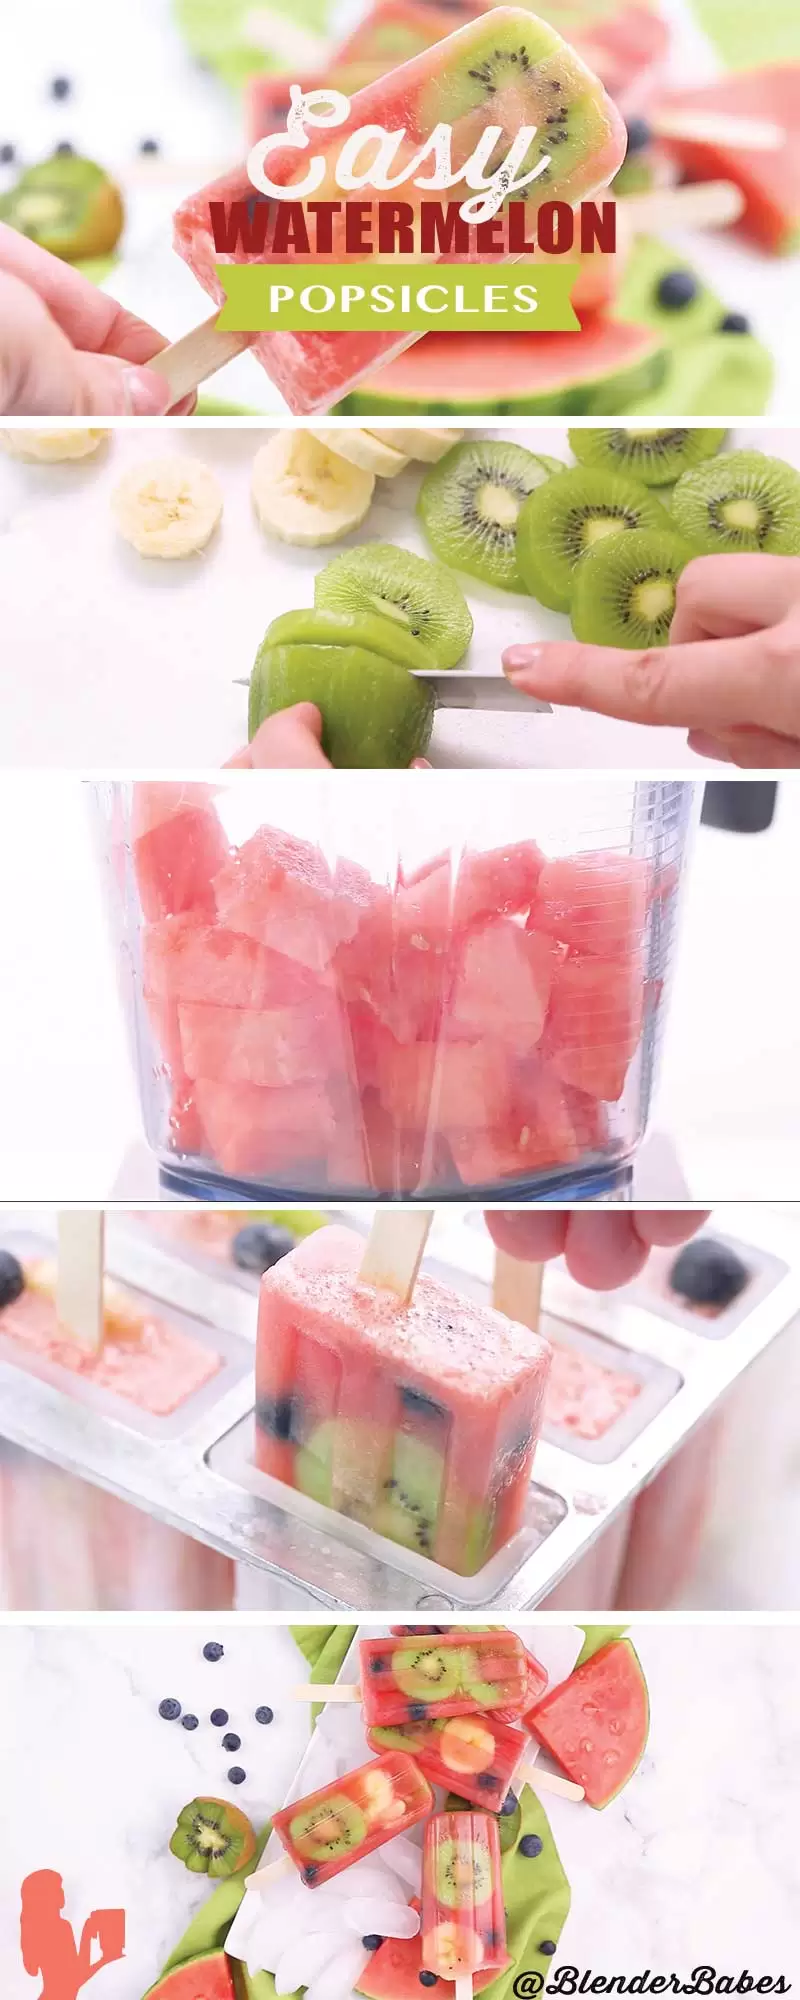 Watermelon Popsicles Recipe with Fruit via @BlenderBabes #watermelonpopsicles #watermelonrecipes #popsiclerecipes #snacksforkids #blenderbabes